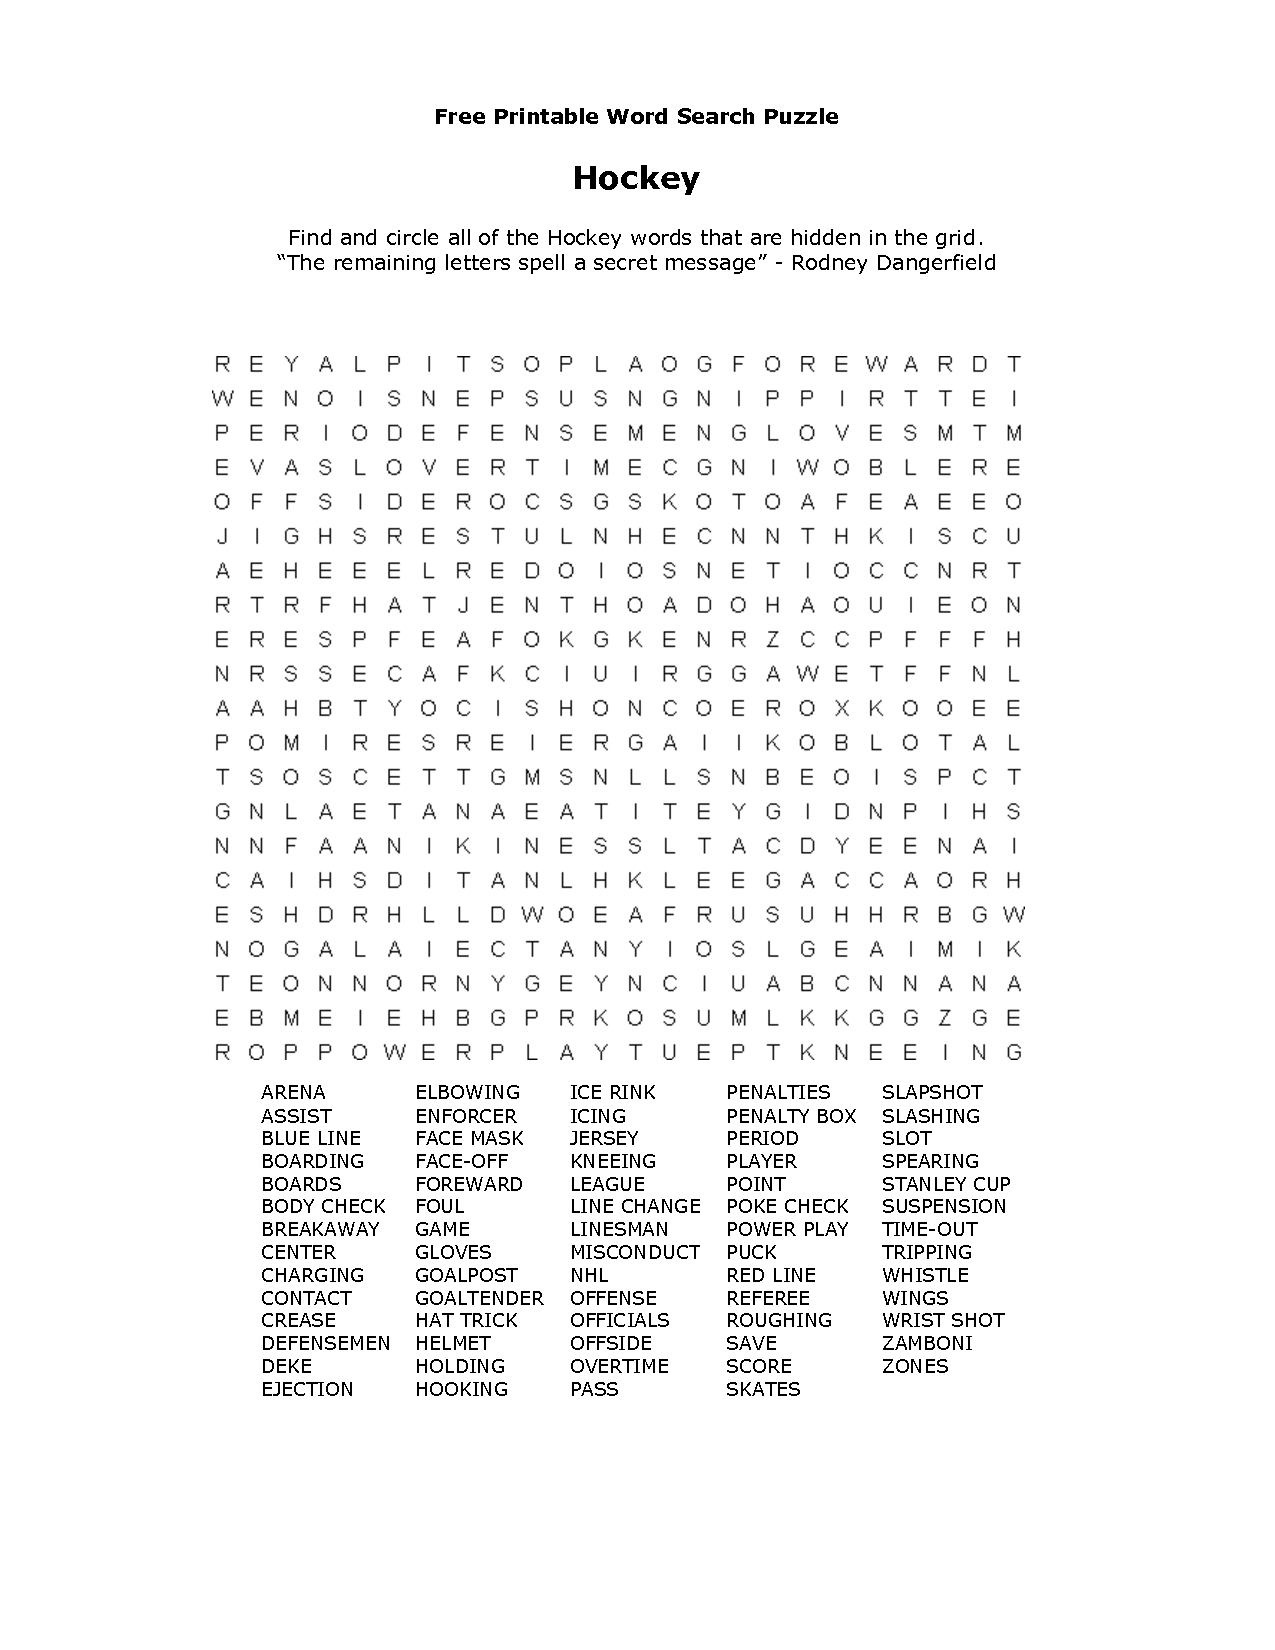 Free Printable Word Searches | طلال | Free Printable Word Searches - Free Printable Word Search Puzzles For Adults